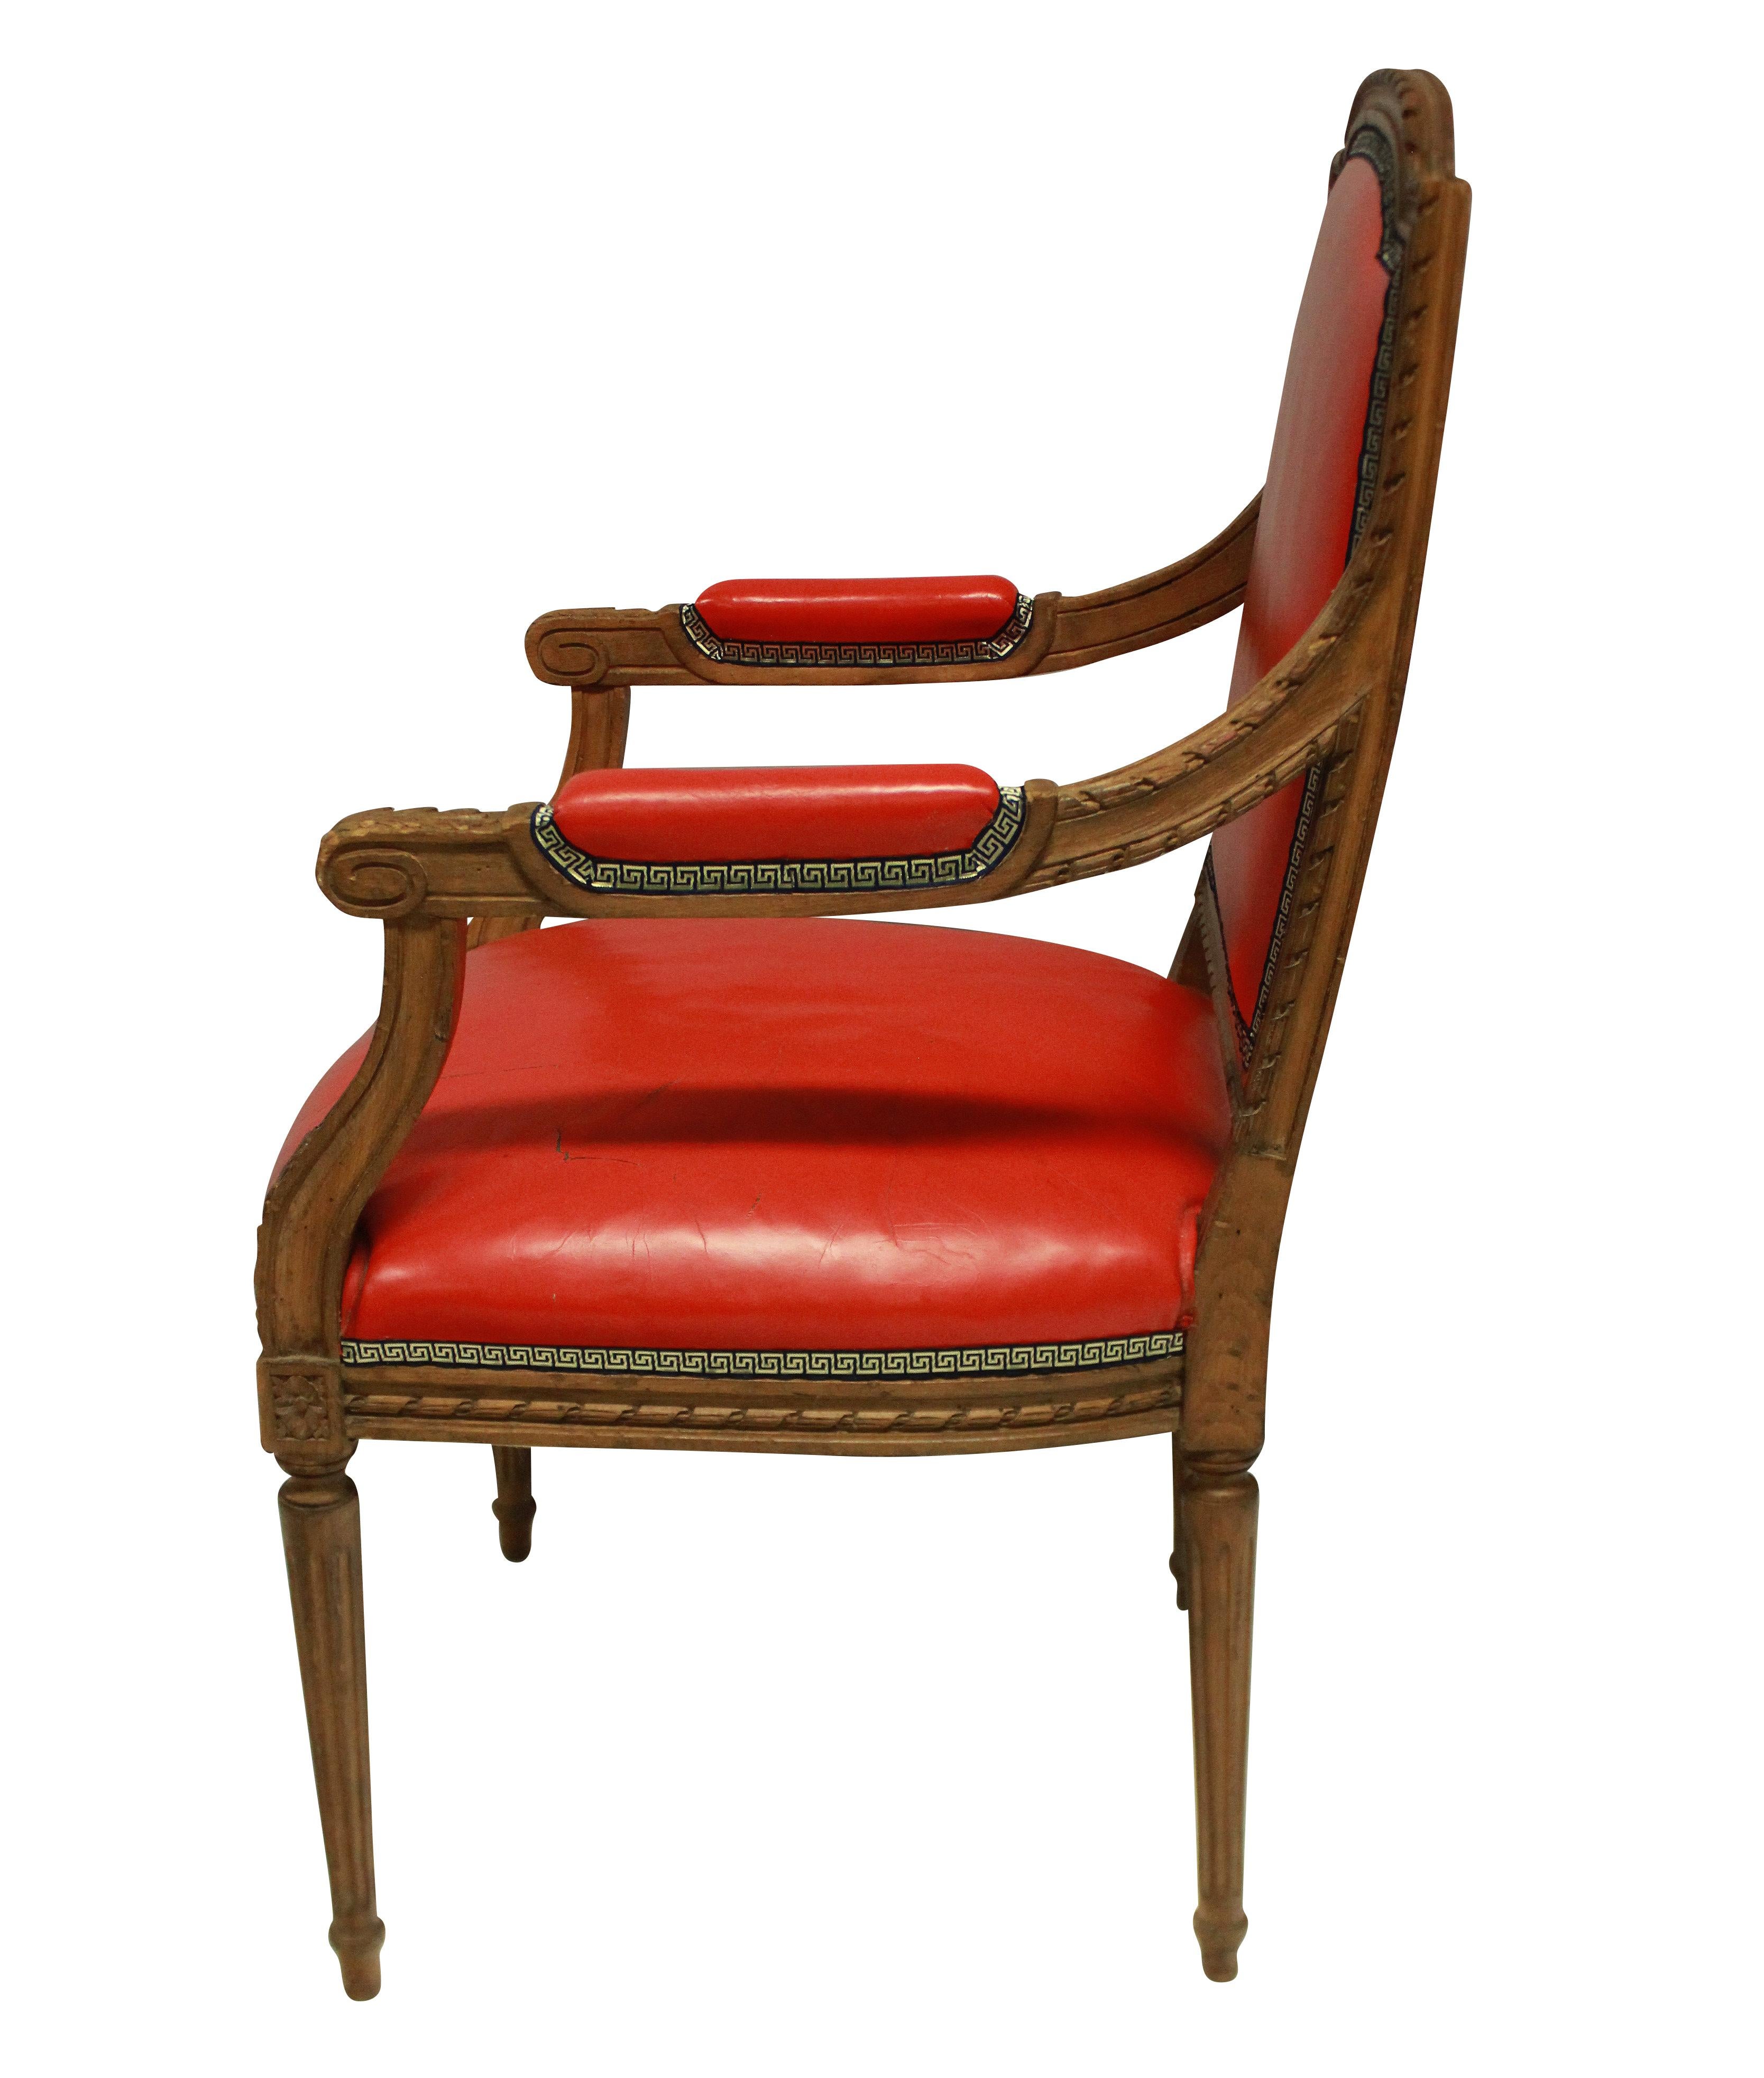 French Louis XVI Style Armchair in Tomato Red Leather